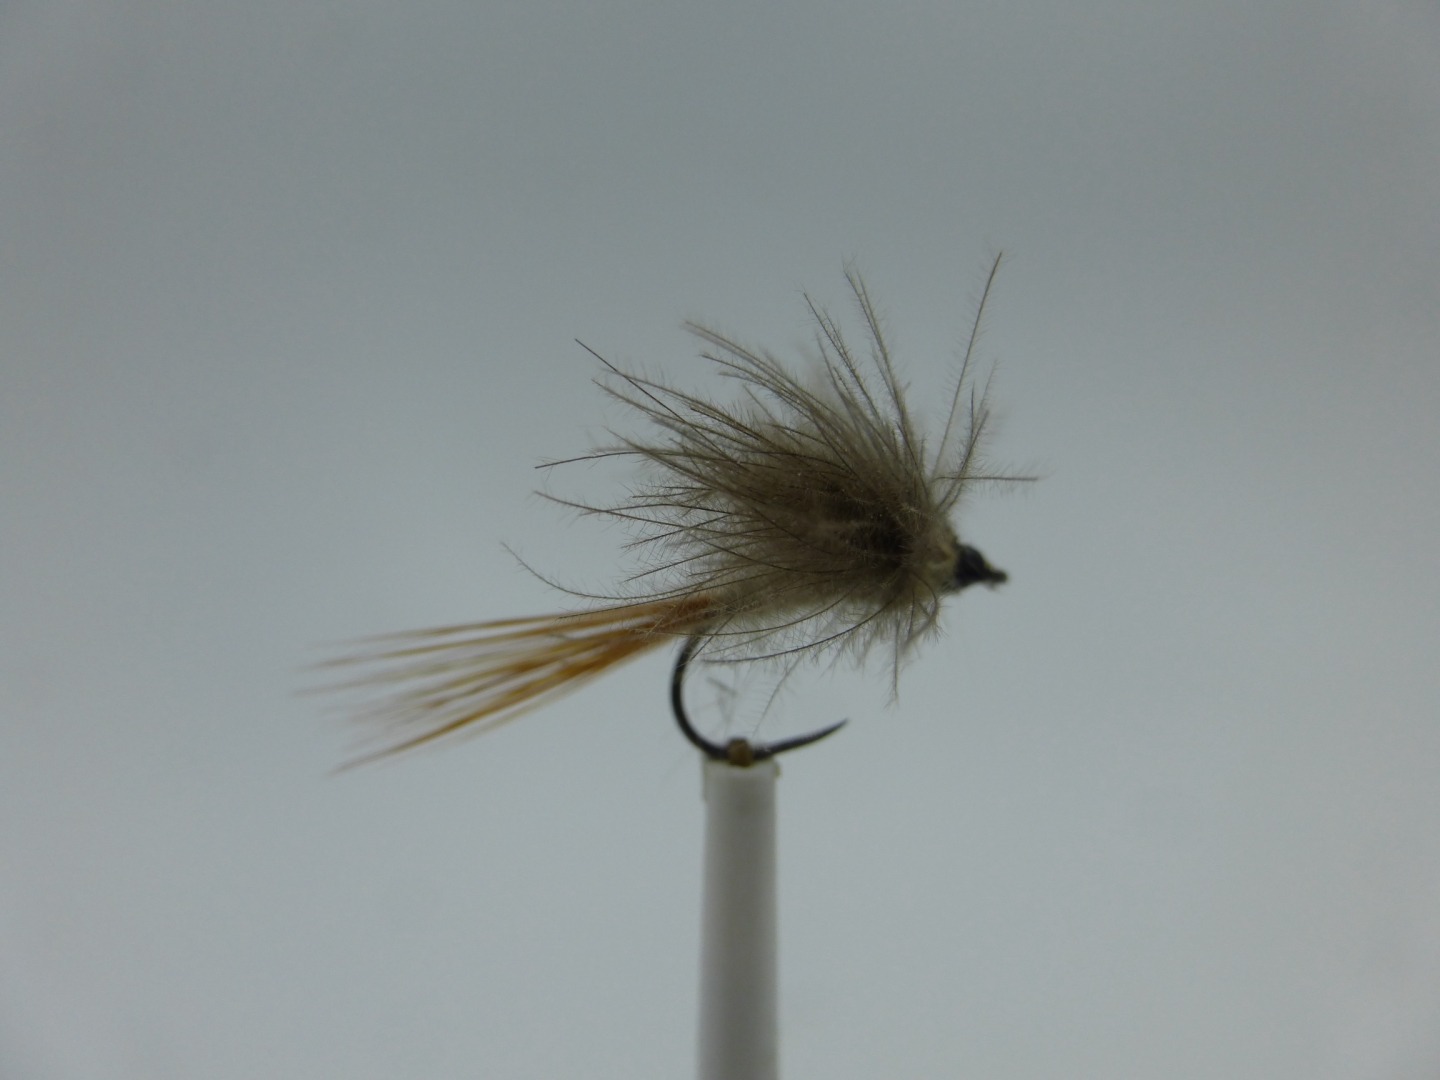 Size 18 CDC Mayfly Hare,s Ear Barbless